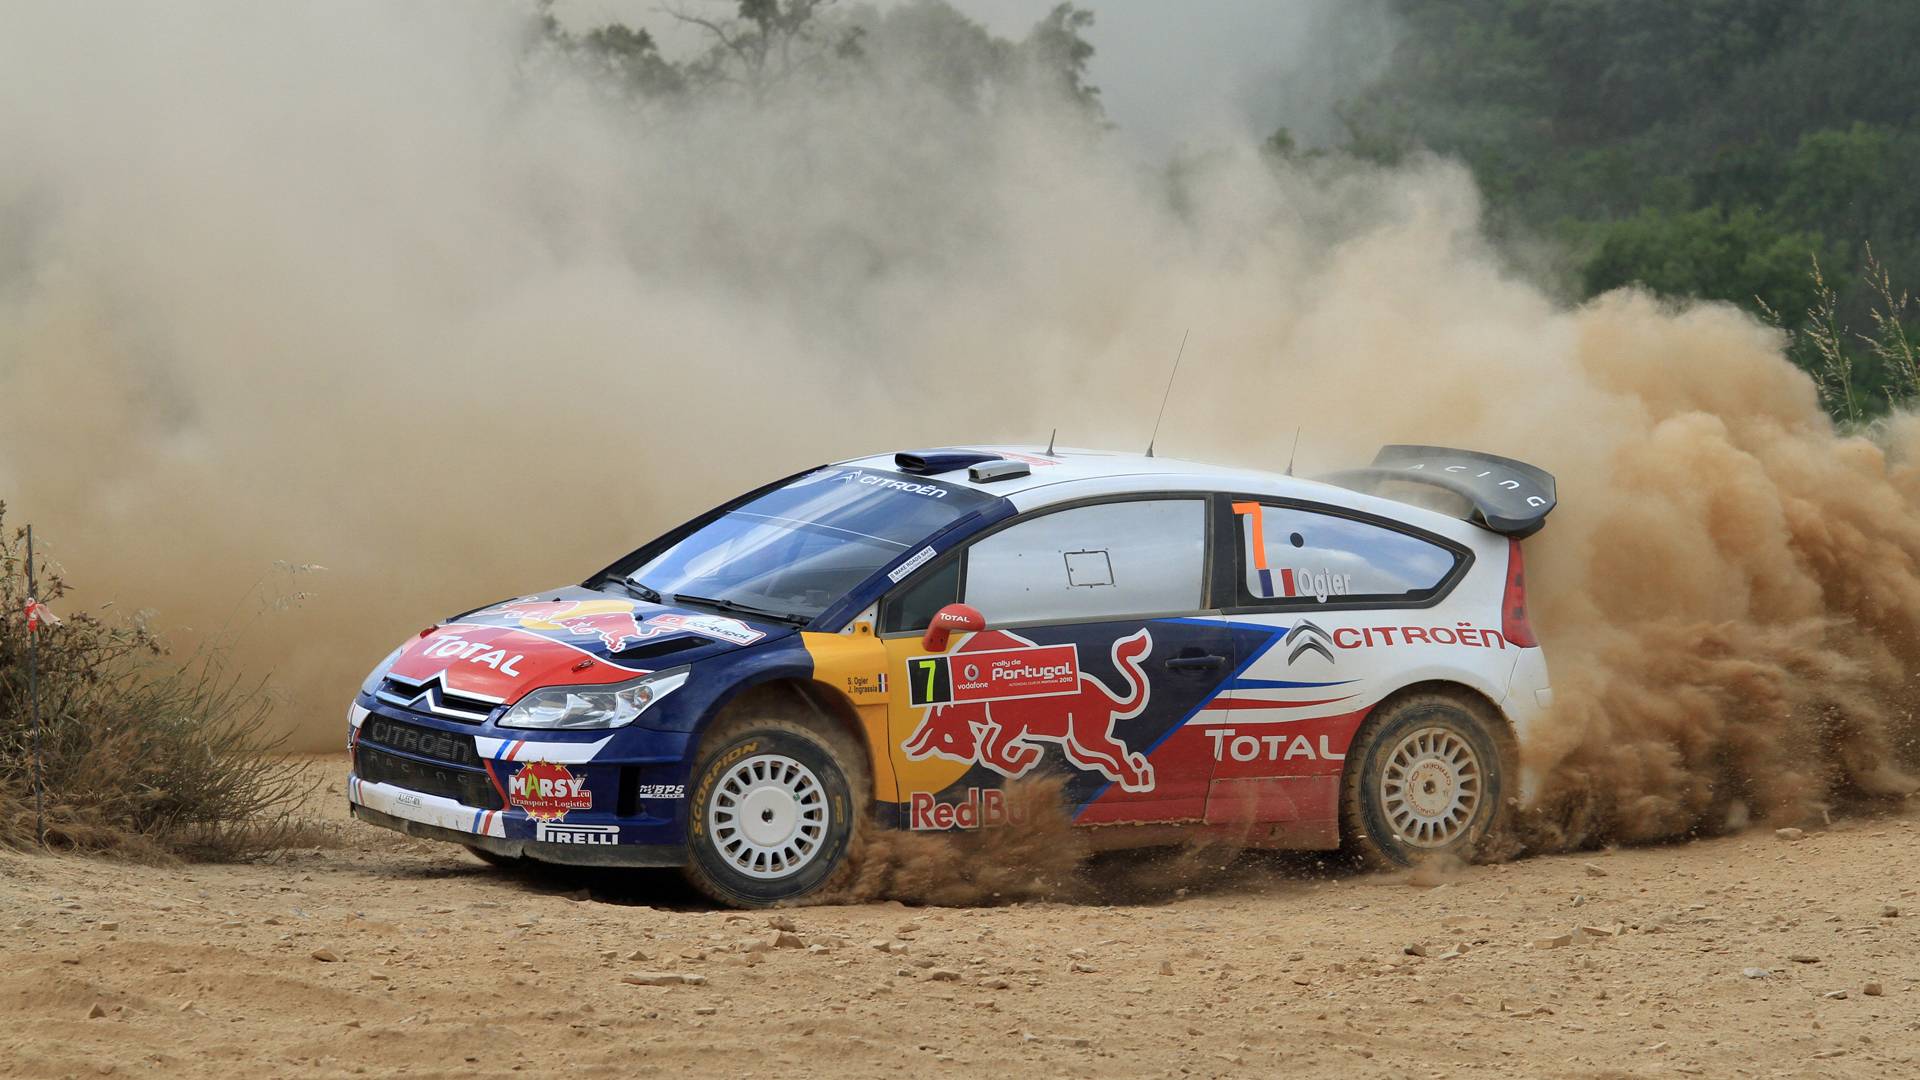 wrc wallpaper HD 10 - Image And Wallpaper free to download